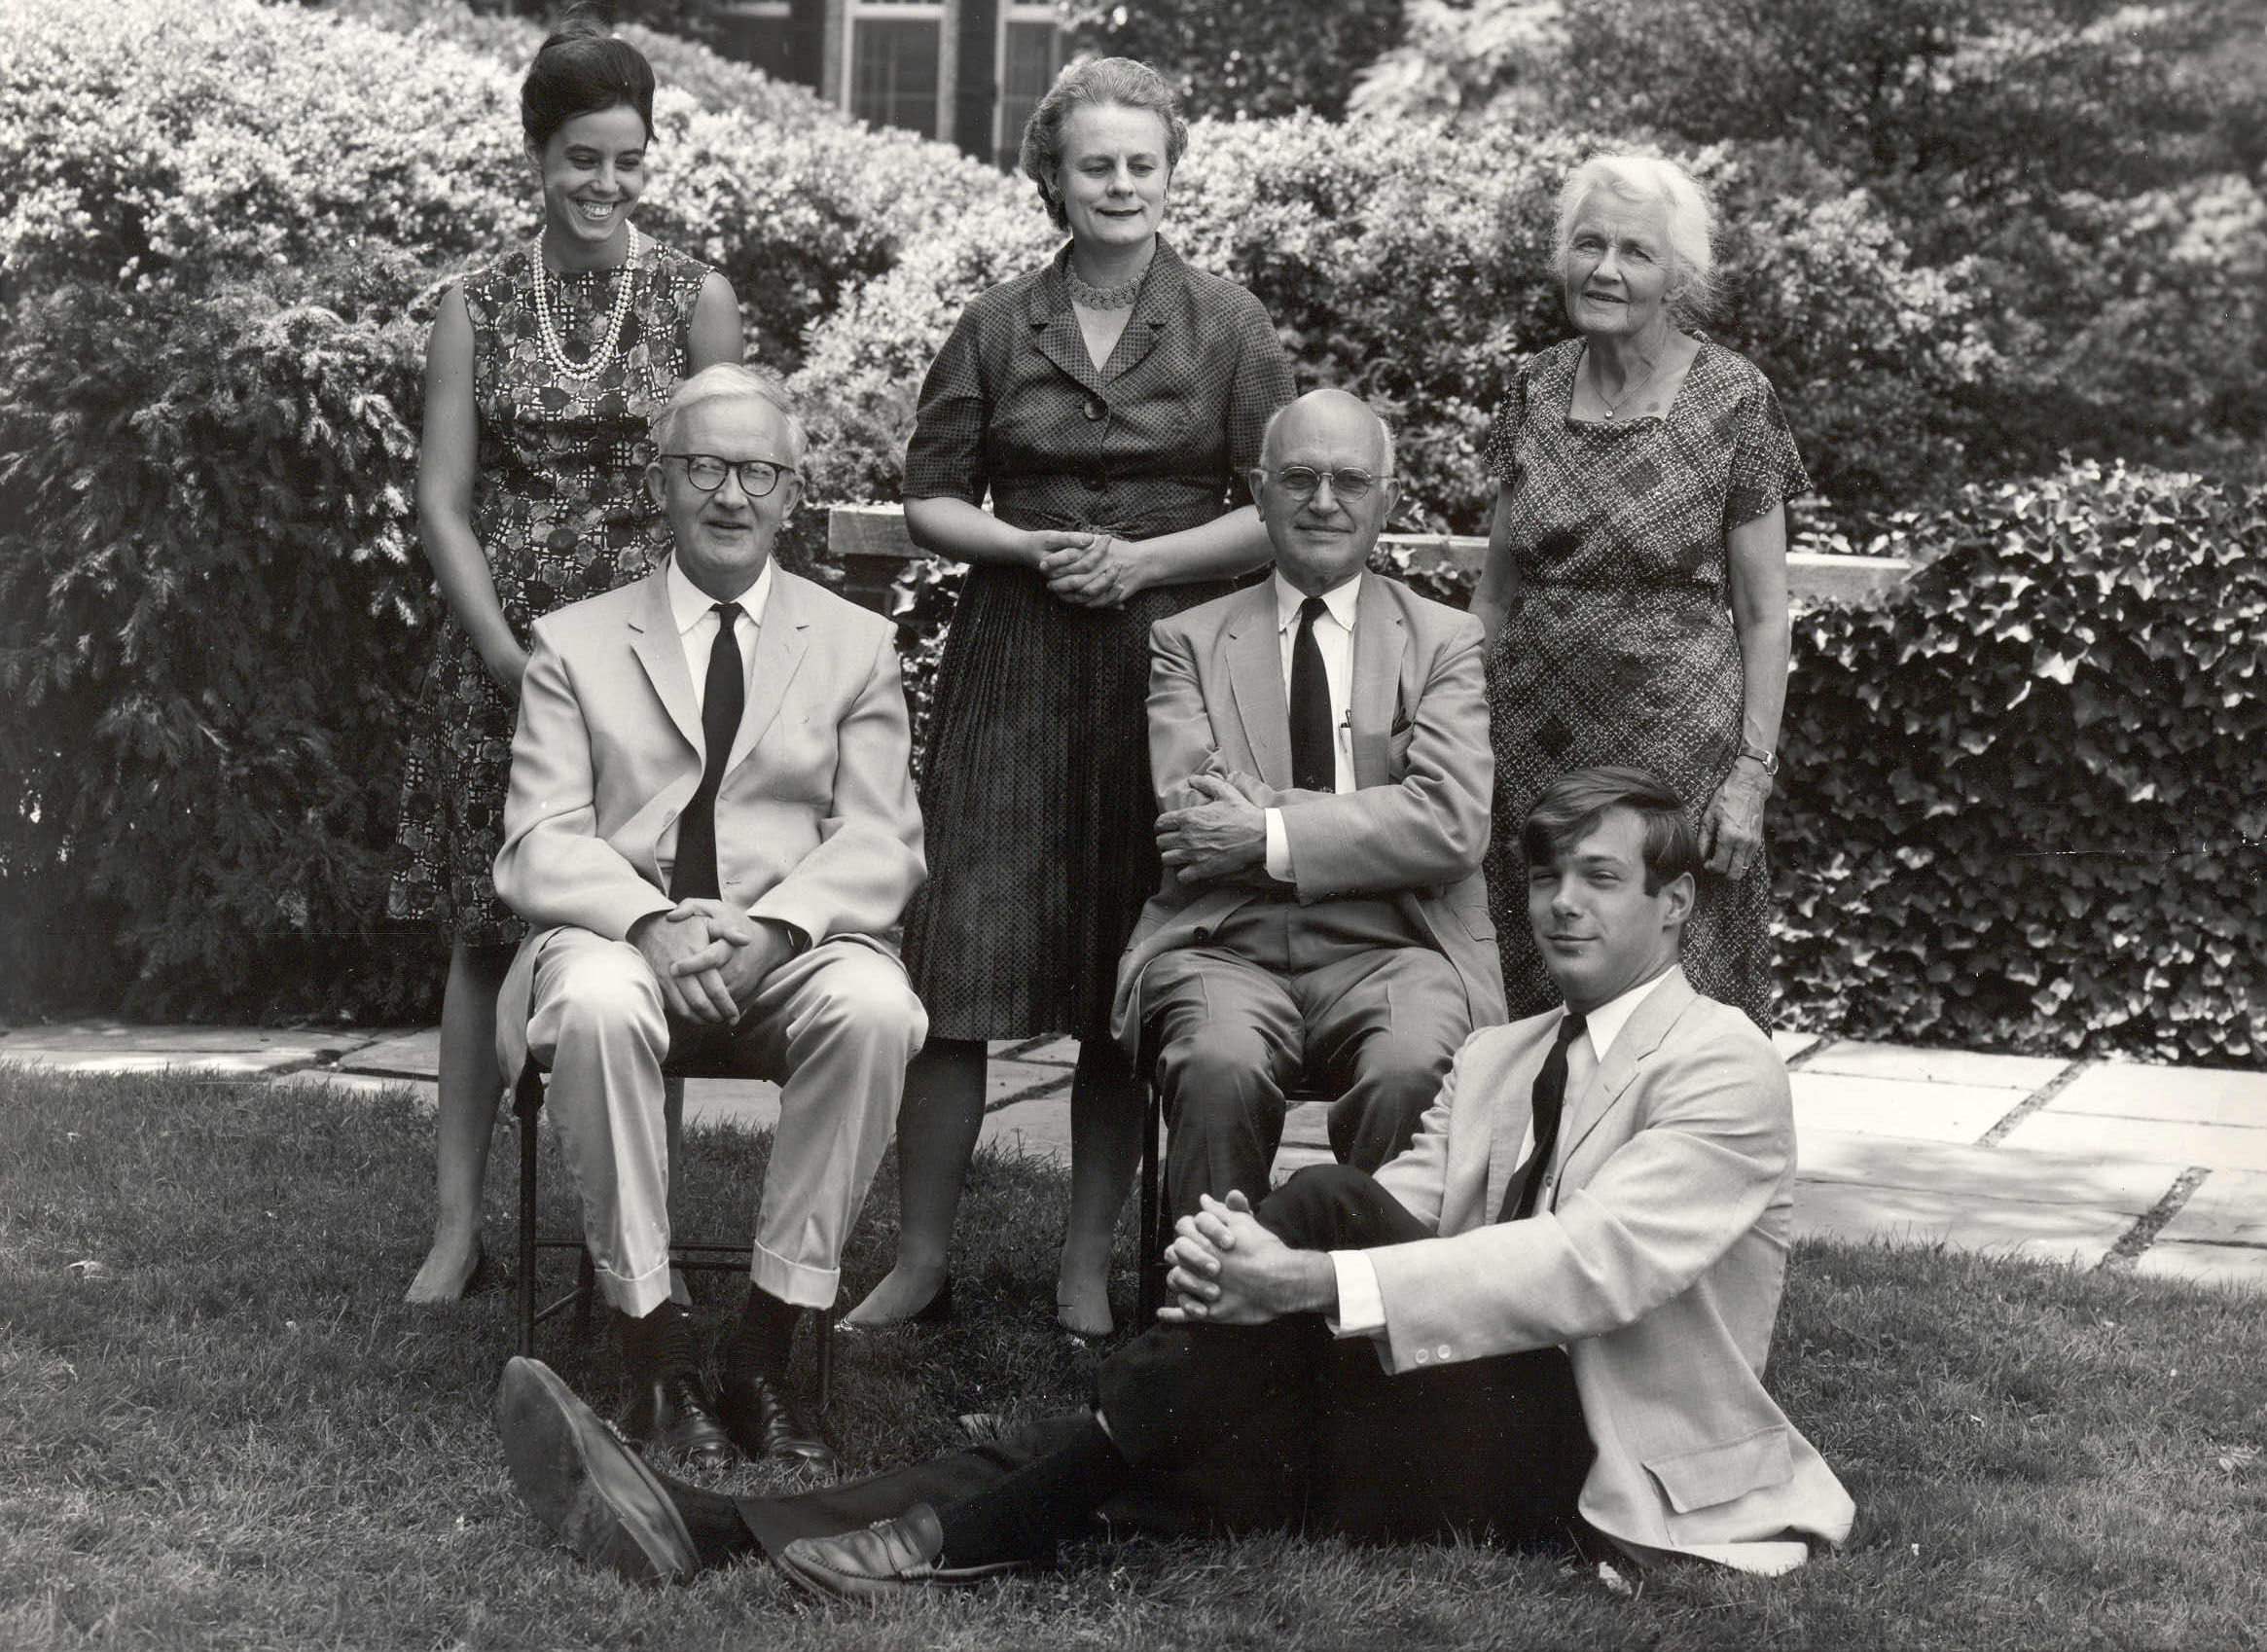 Back row, left to right: Julia Cardoza, Julia Warner, and Mrs. Alfred Bellinger. Seated, left to right: Philip Grierson and Alfred Bellinger. Seated on the ground: Julian Hartzell. Dumbarton Oaks Archives, AR.PH.Misc. 181